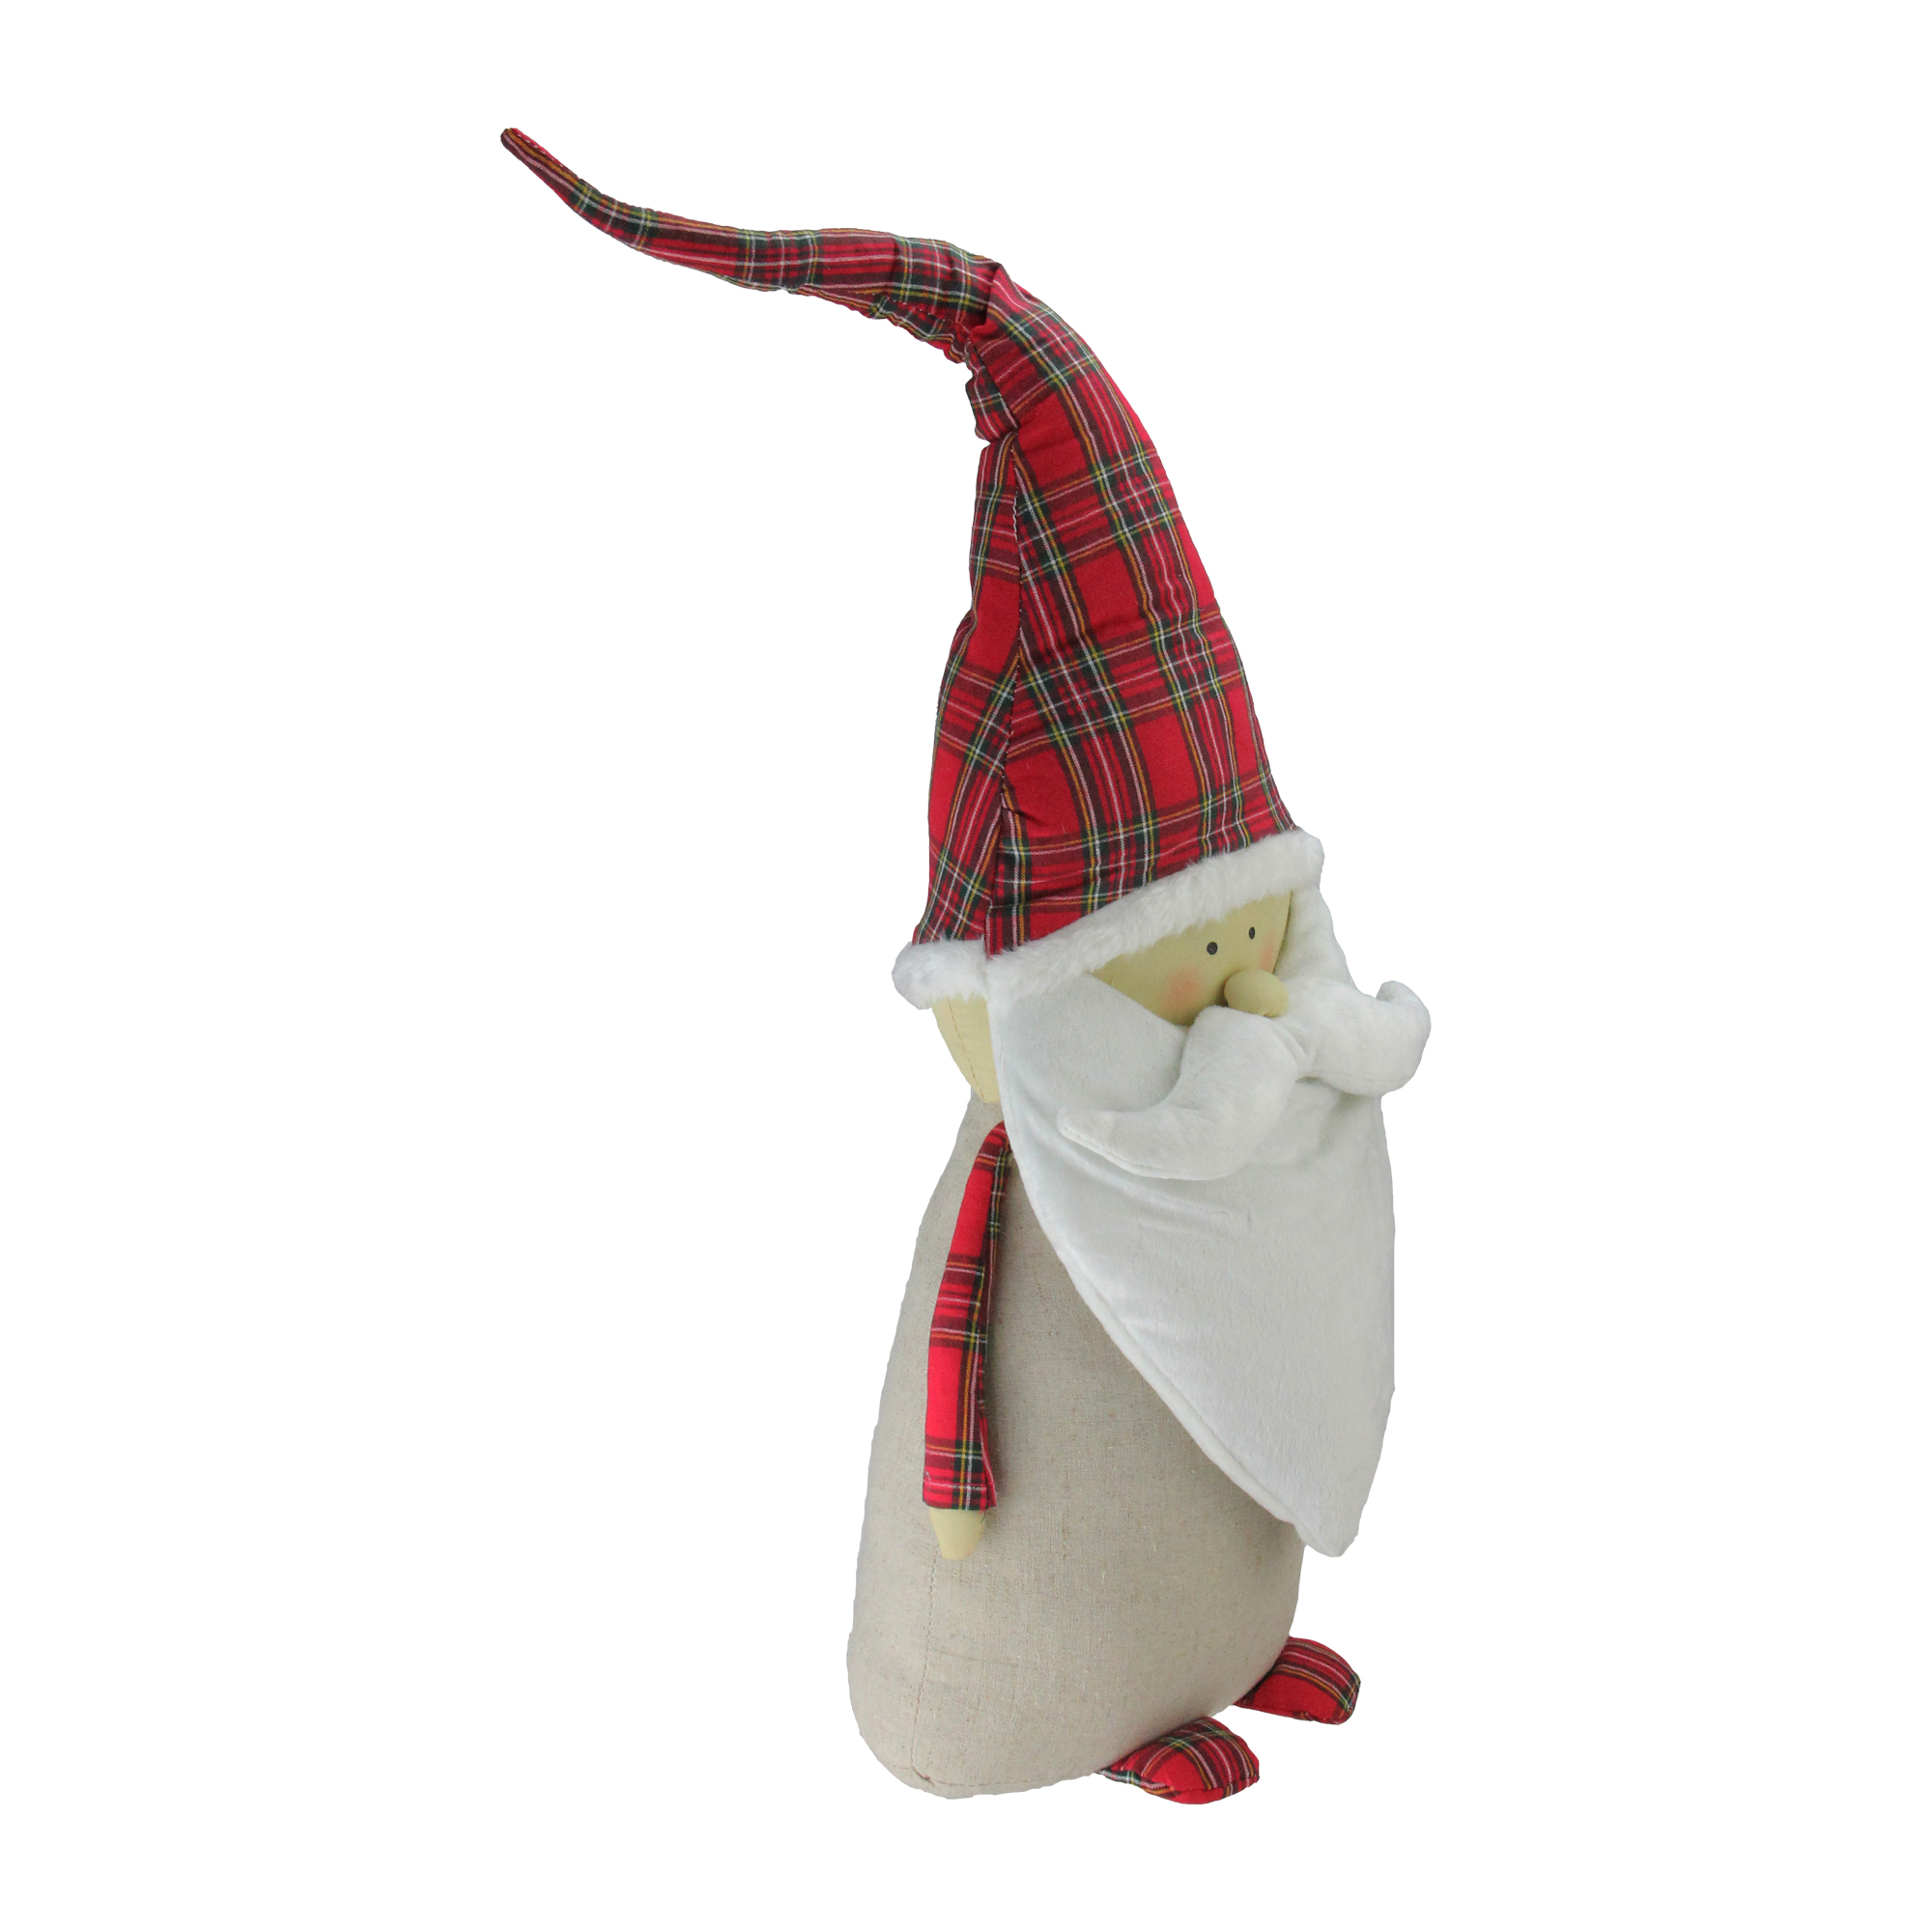 Northlight 26" White and Red Santa Claus Gnome with Plaid Hat Christmas Figurine